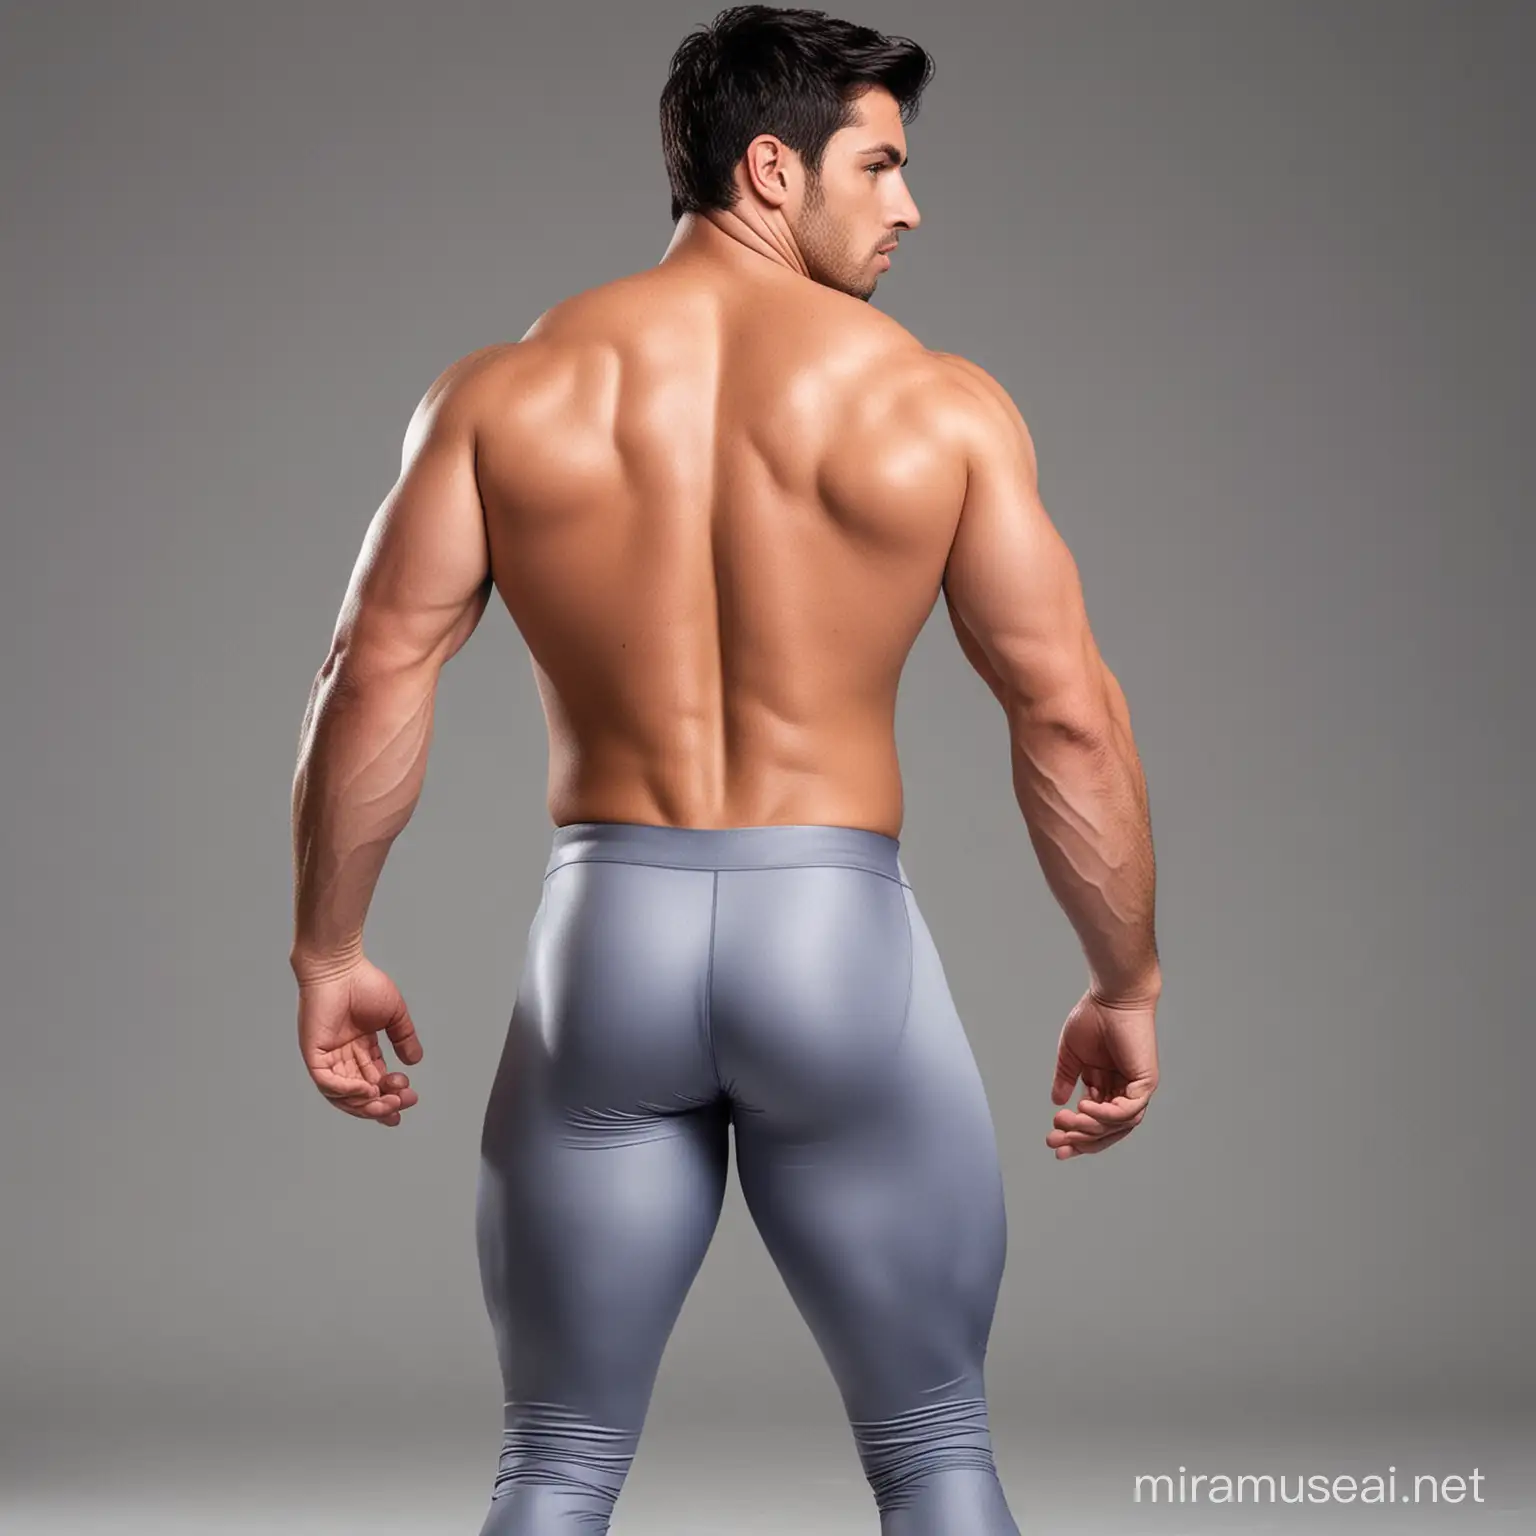 Charming shirtless muscular 28 year old male Argentine wrestler, with short black hair, slight tanned skin and grey eyes, wearing  long periwinkle spandex leggings, well defined buttocks, rear view, in cartoon network style.